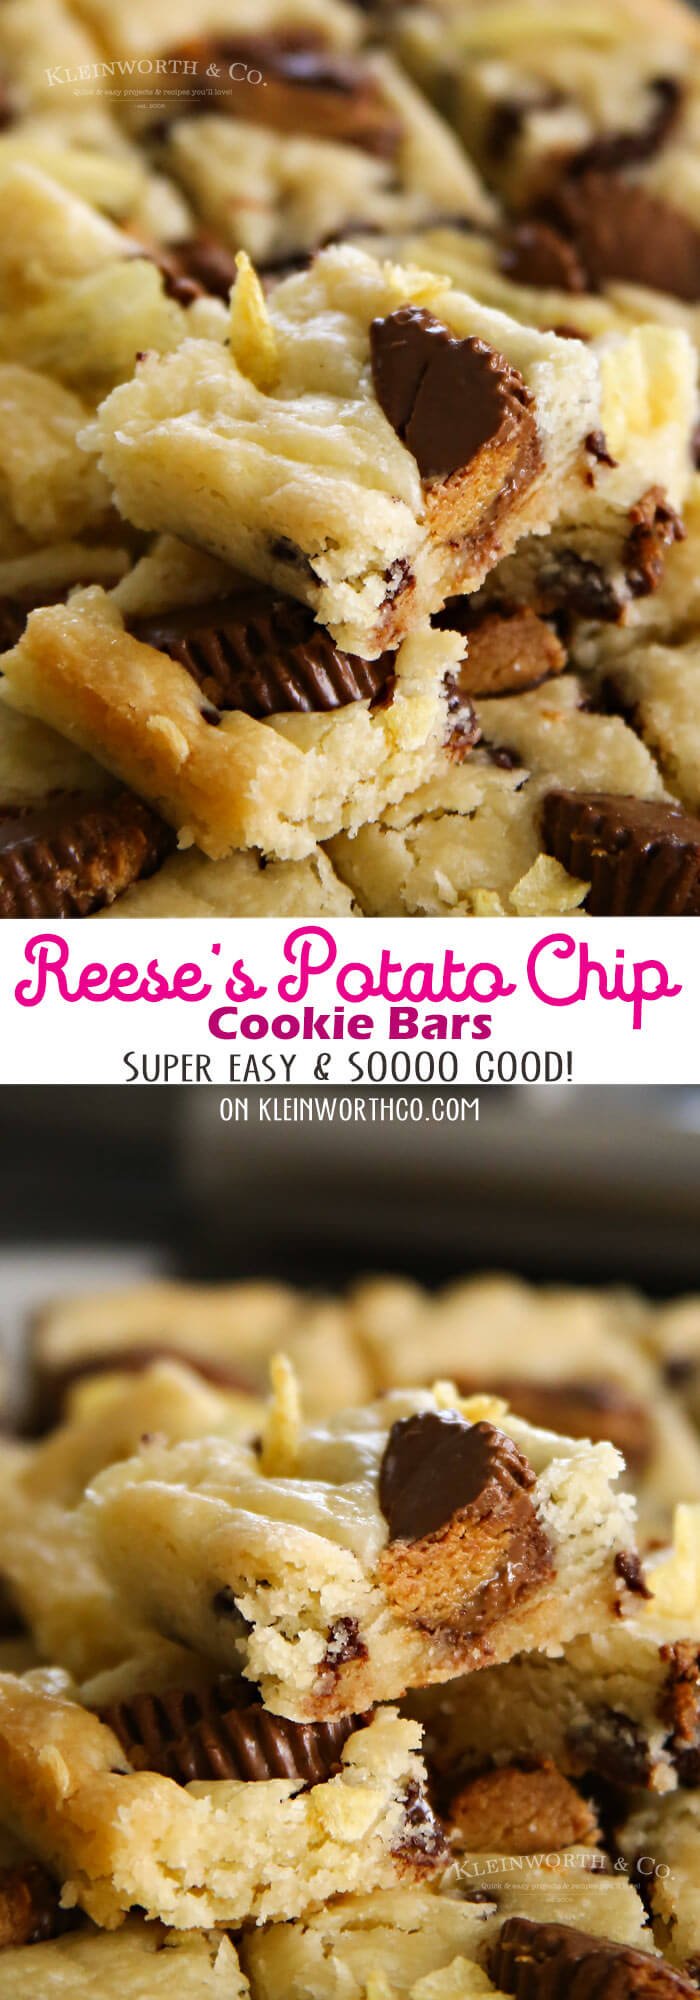 Reese's Potato Chip Cookie Bars